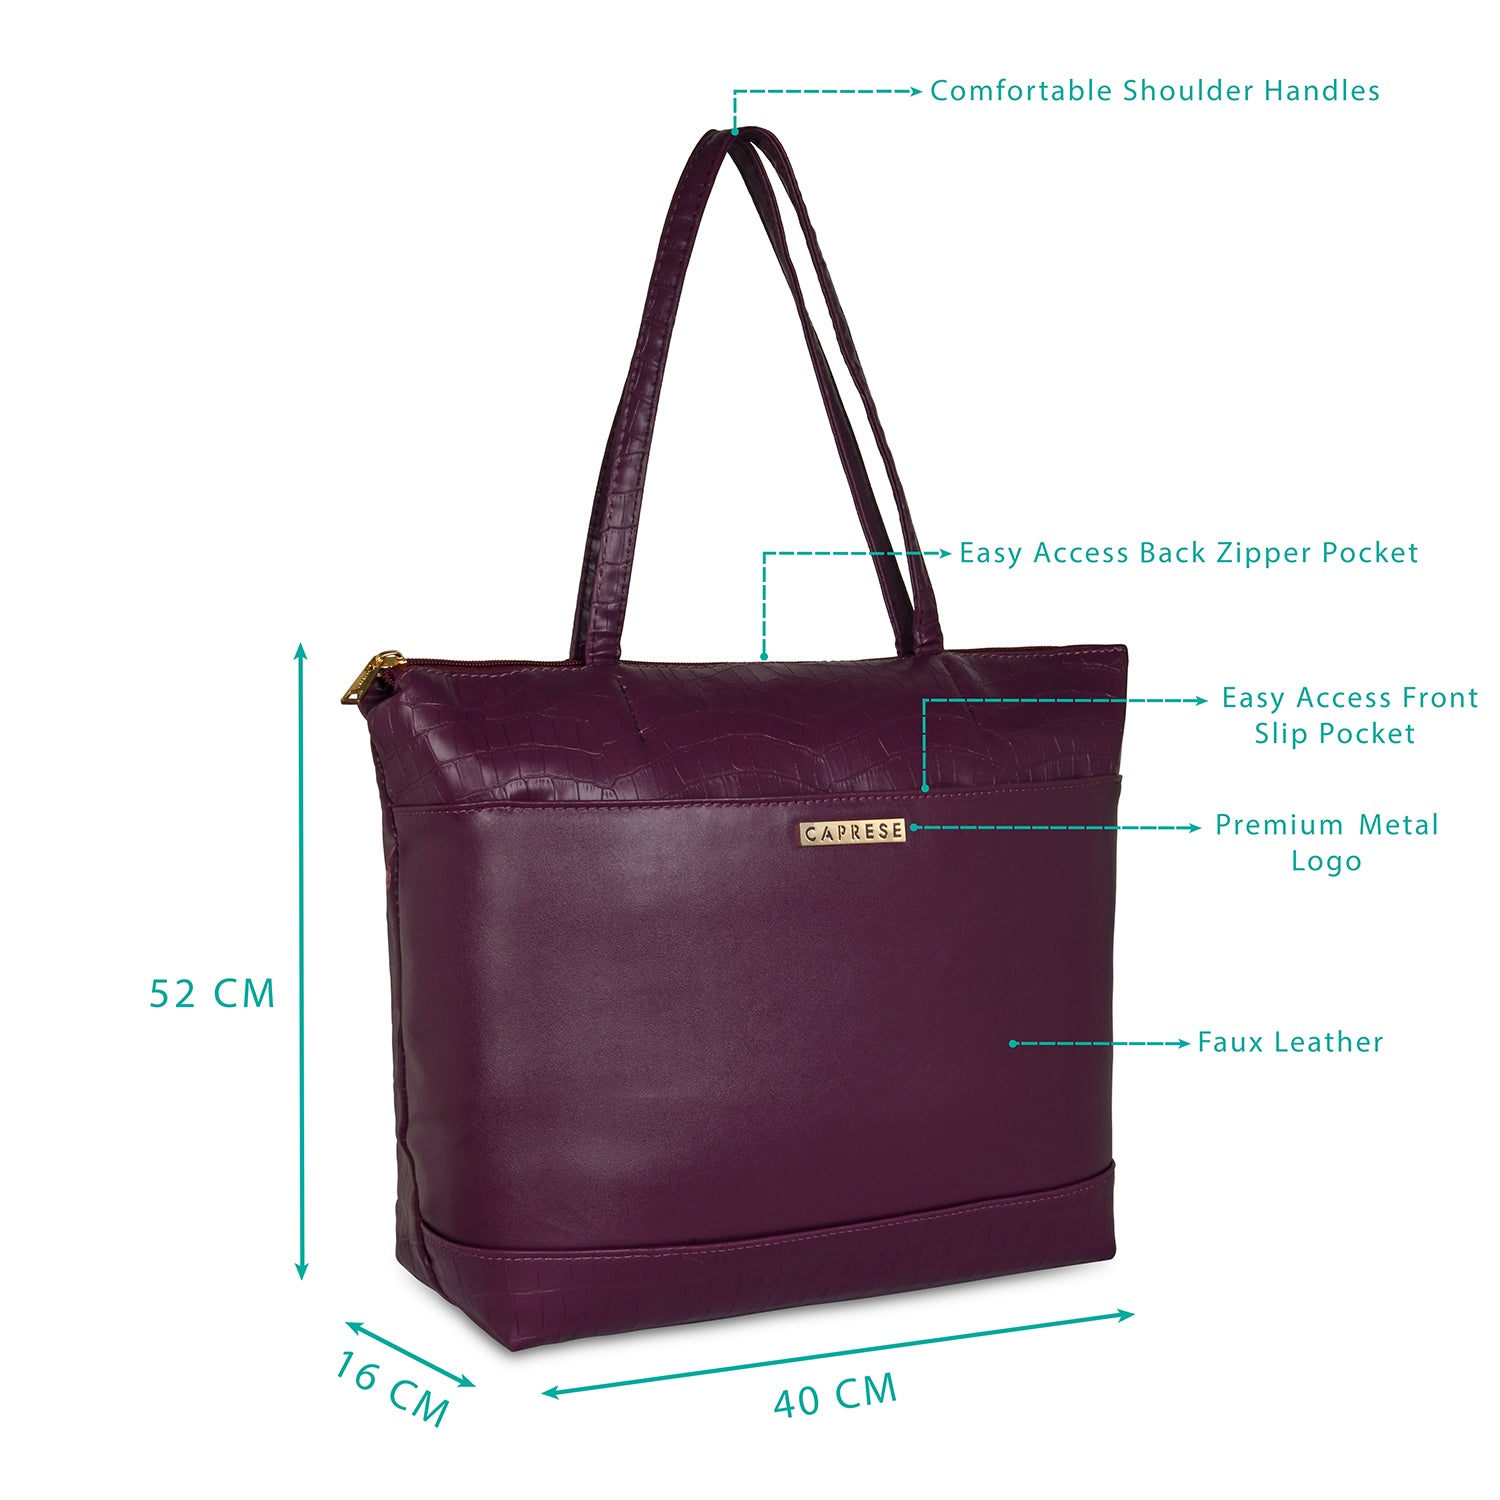 Real Simple debuts new handbag collection focused on style and  functionality - FIPP